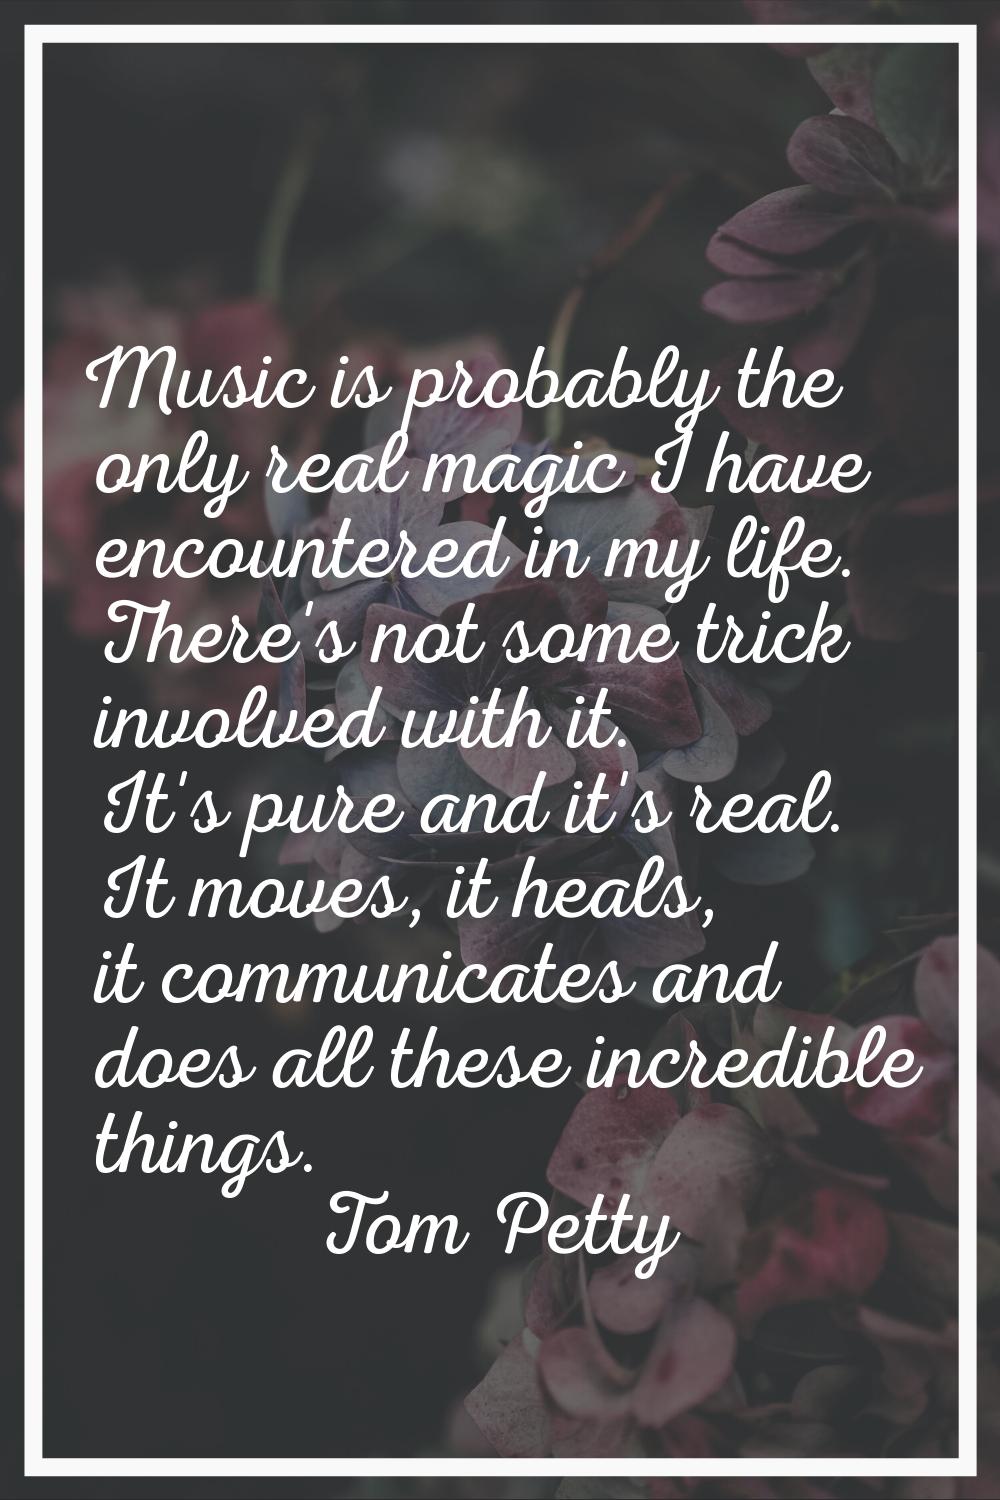 Music is probably the only real magic I have encountered in my life. There's not some trick involve